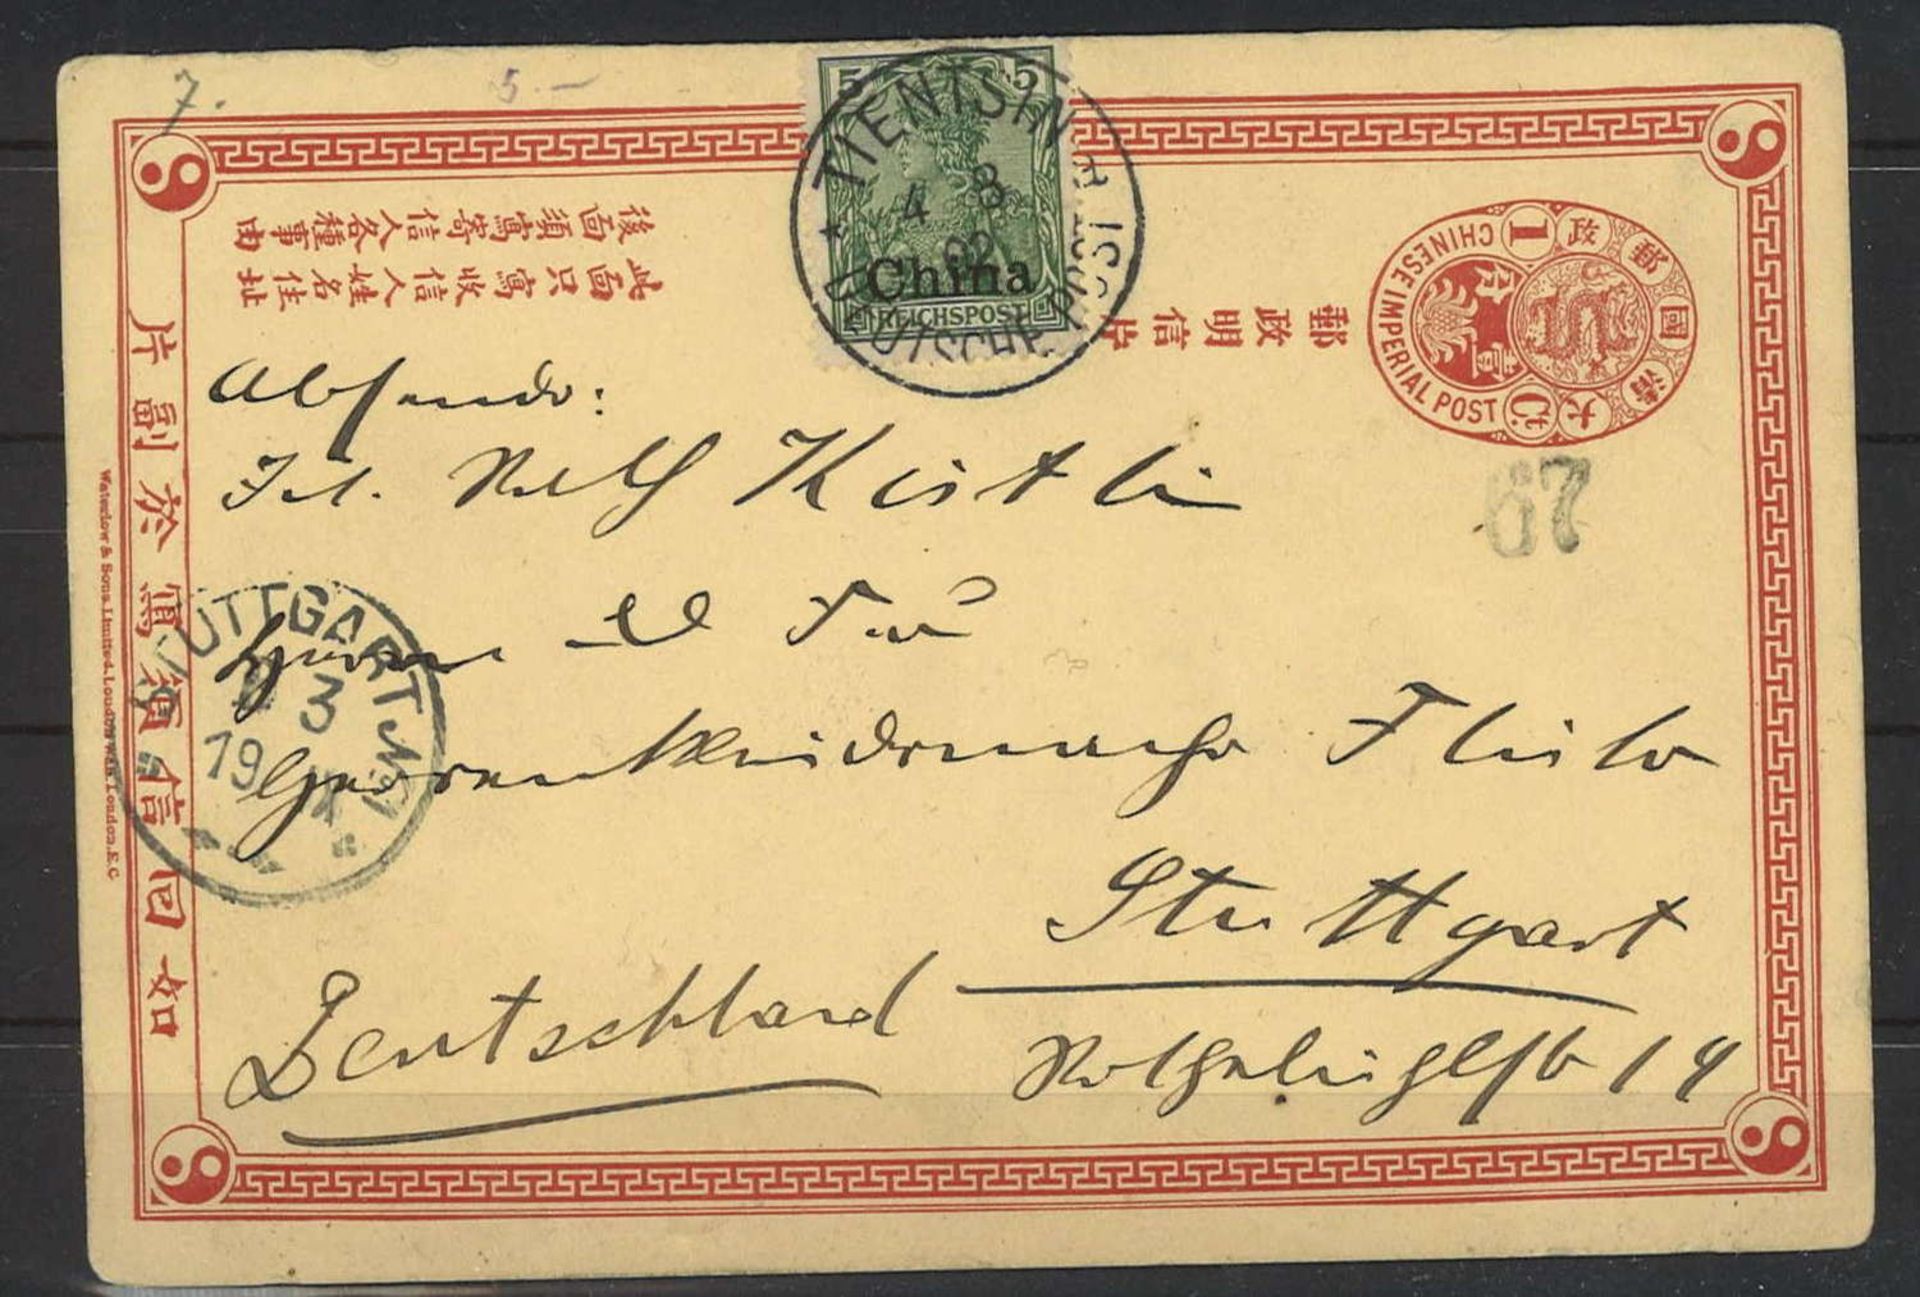 German colonies of China, hand-painted postcard